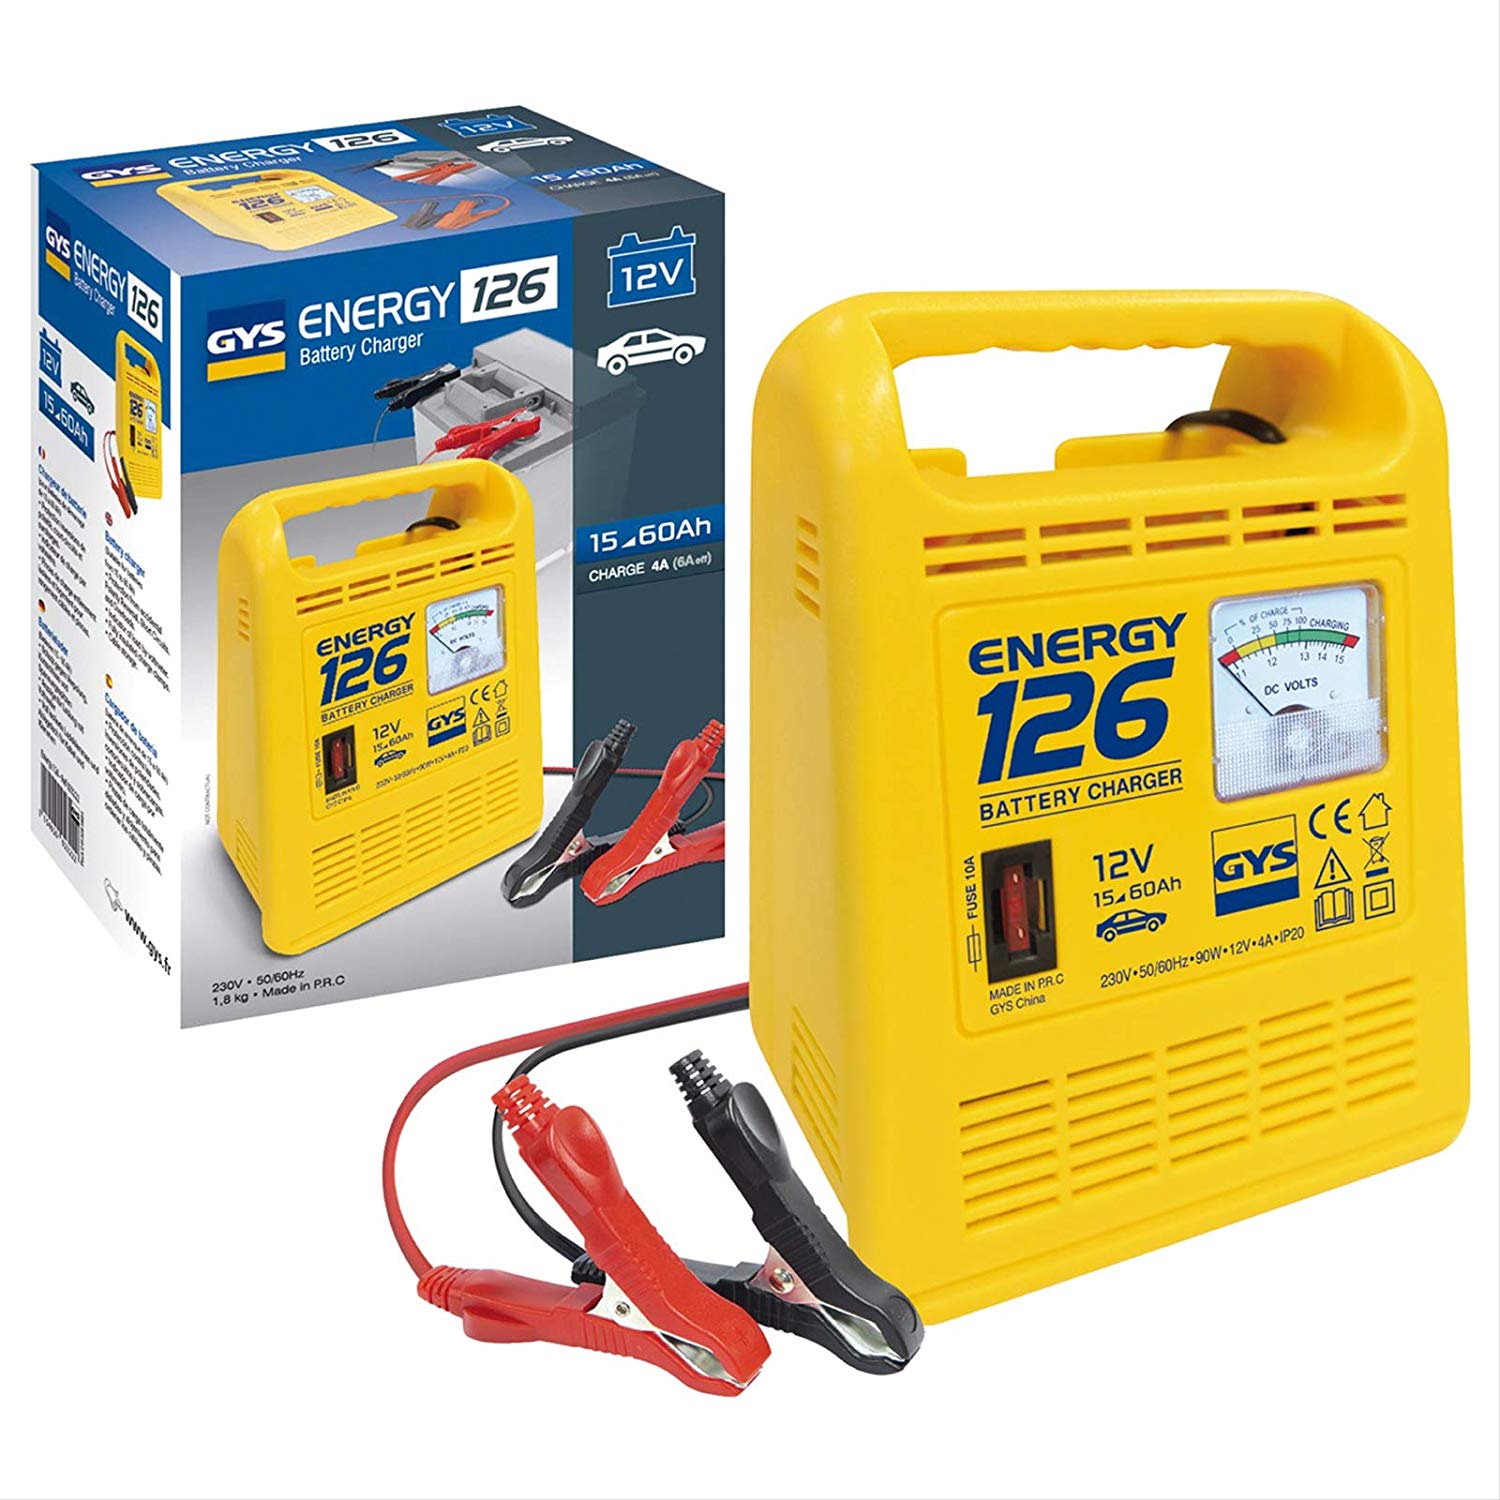 Gys Car Battery Charger And Tester Energy 126